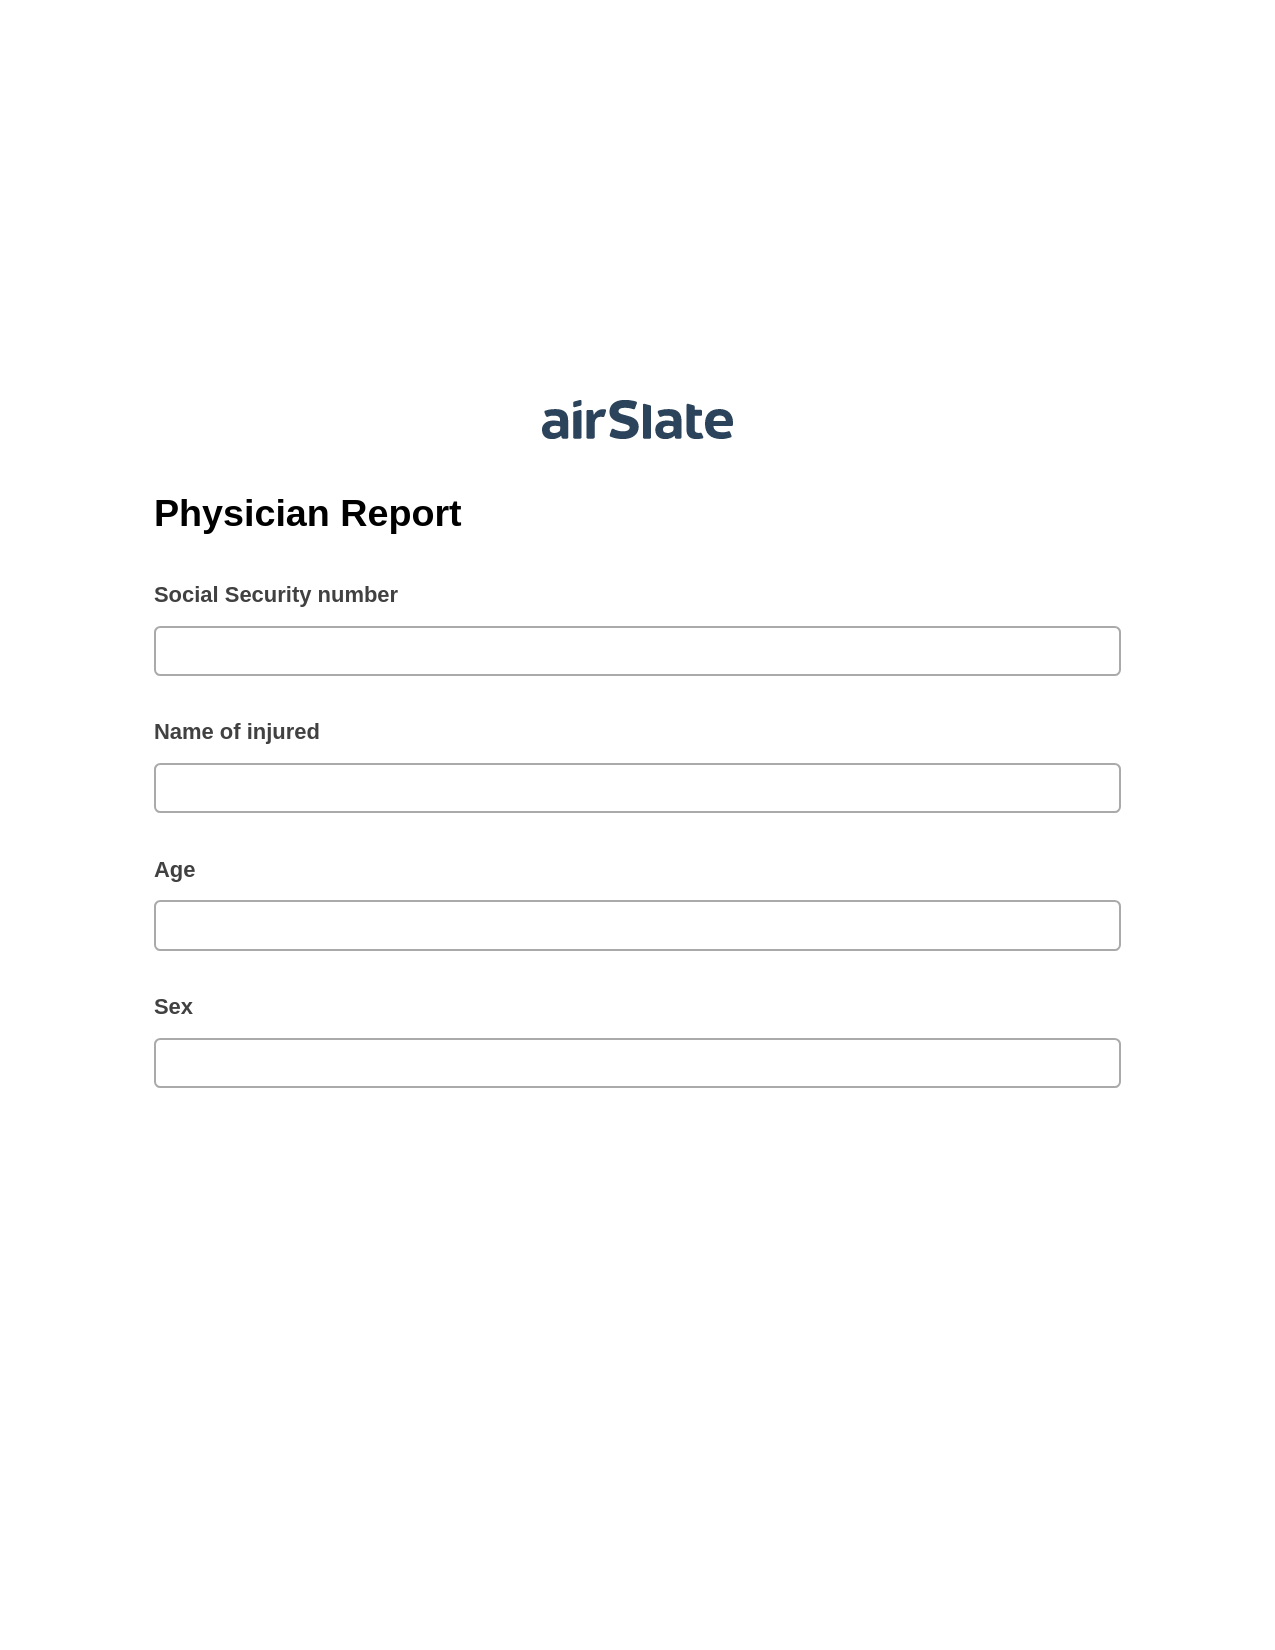 Physician Report Pre-fill from MySQL Bot, Send Mailchimp Campaign Bot, Export to Excel 365 Bot